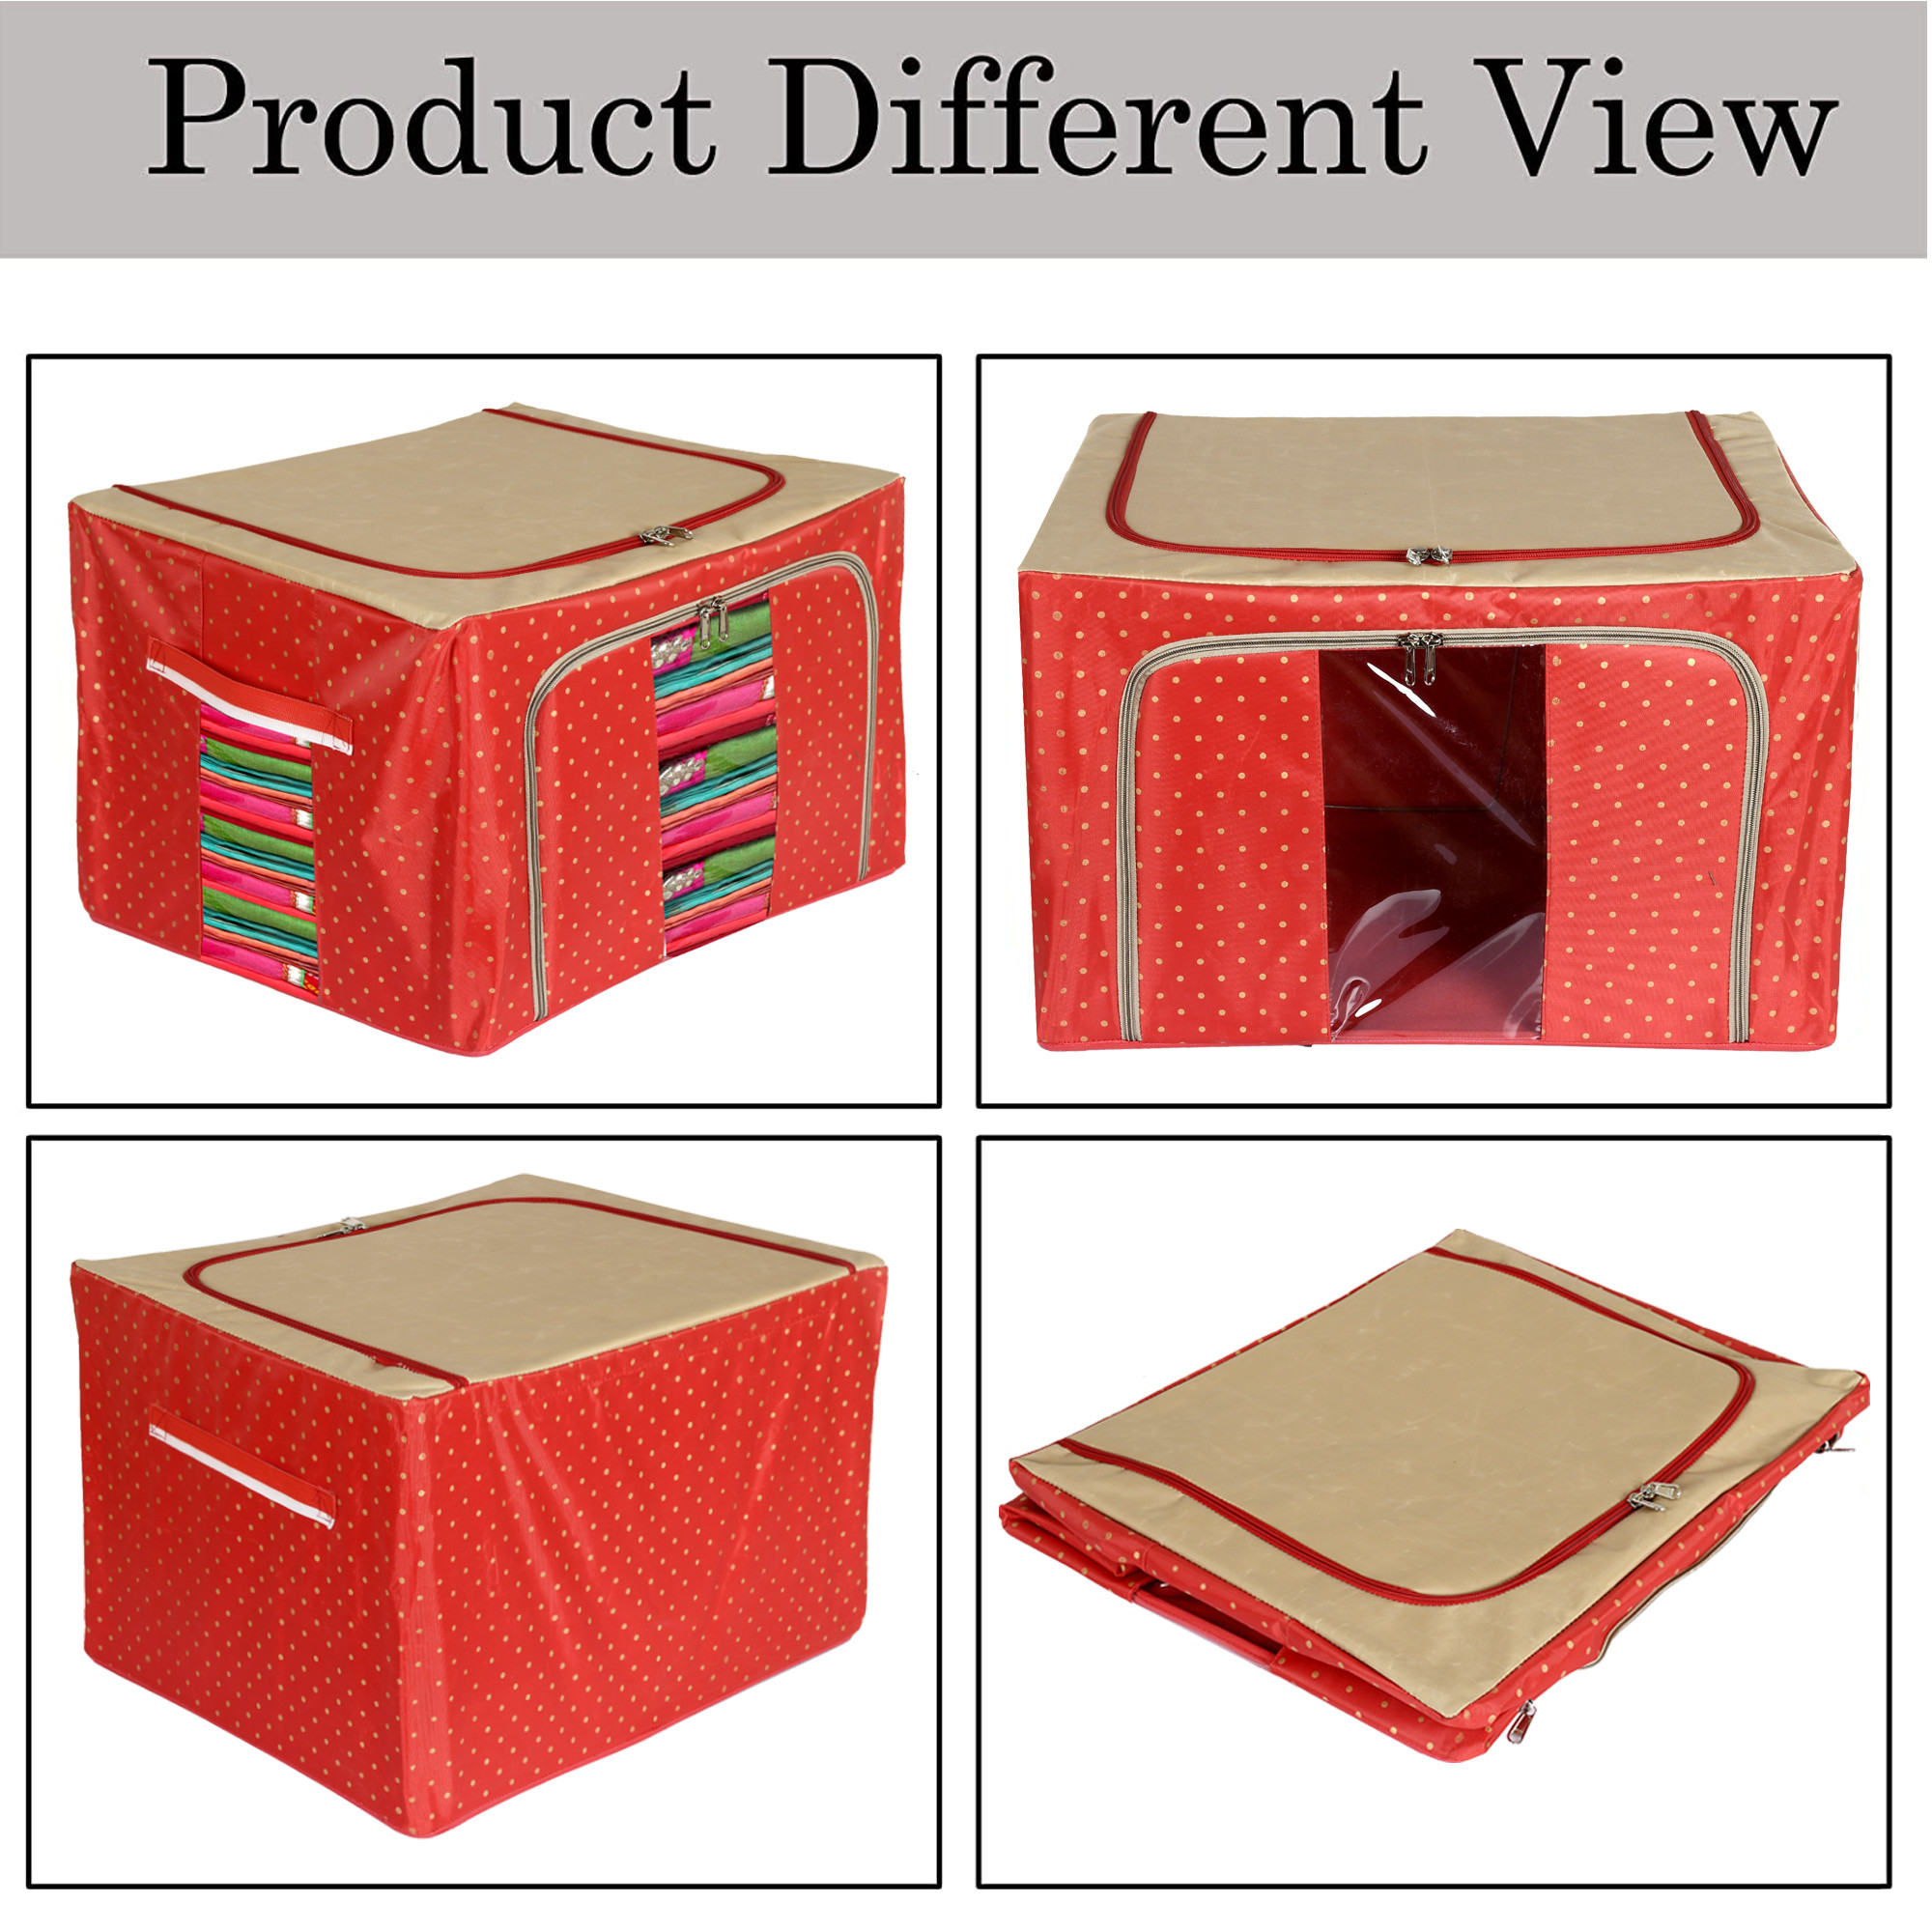 Kuber Industries Dot Printed Steel Frame Storage Box/Organizer For Clothing, Blankets, Bedding With Clear Window, 24Ltr. (Red & Brown)-44KM0213